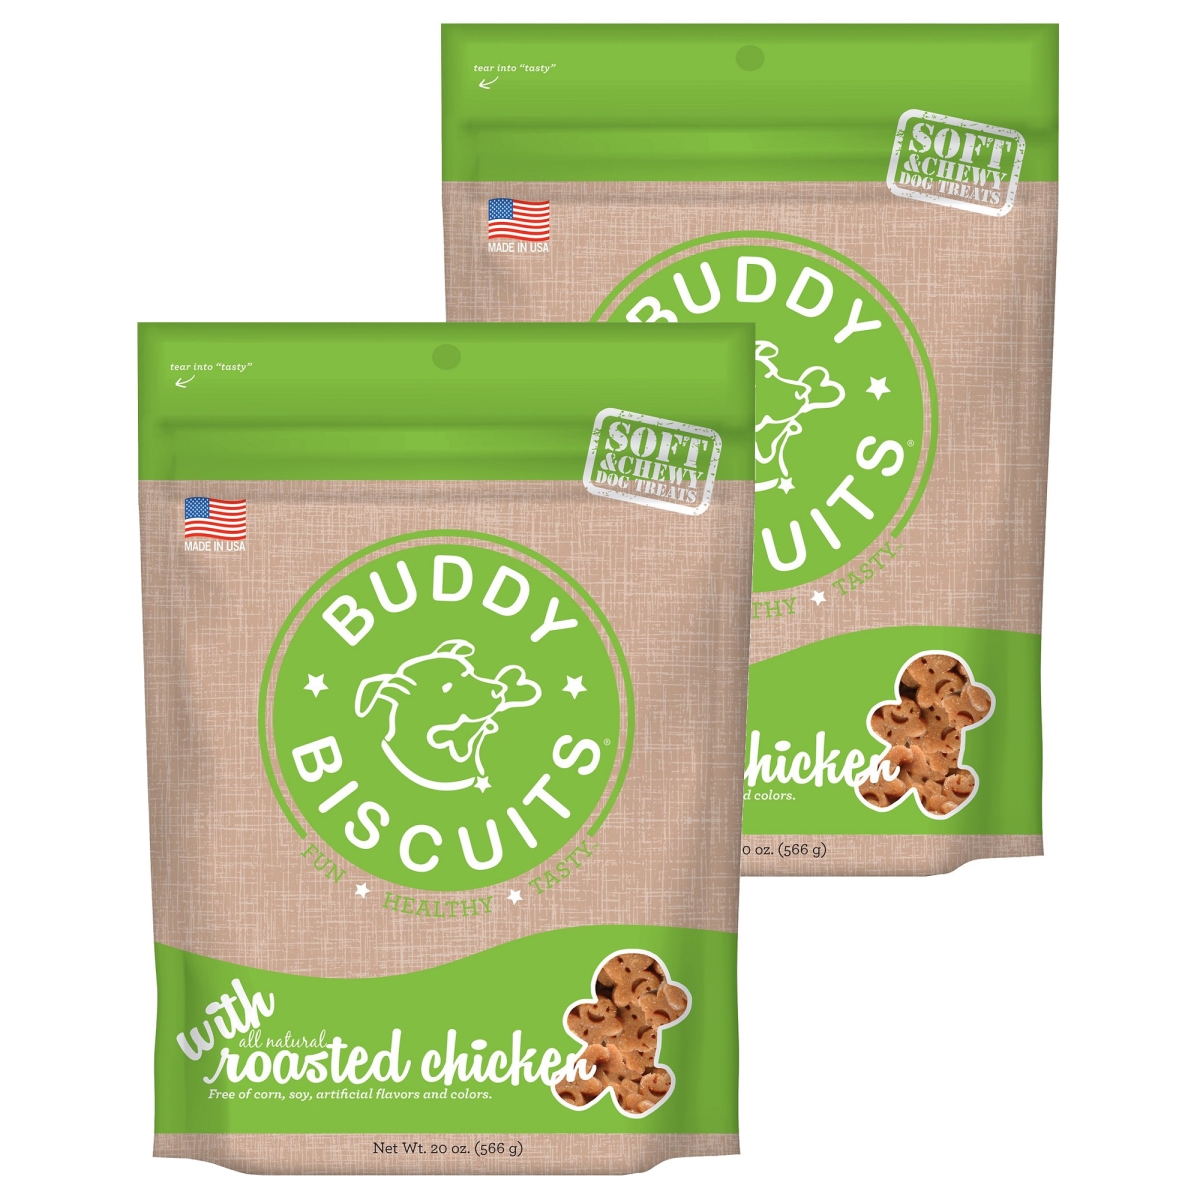 192959800630 20 Oz Buddy Biscuits Soft & Chewy Dog Treats - Roasted Chicken - Pack Of 2